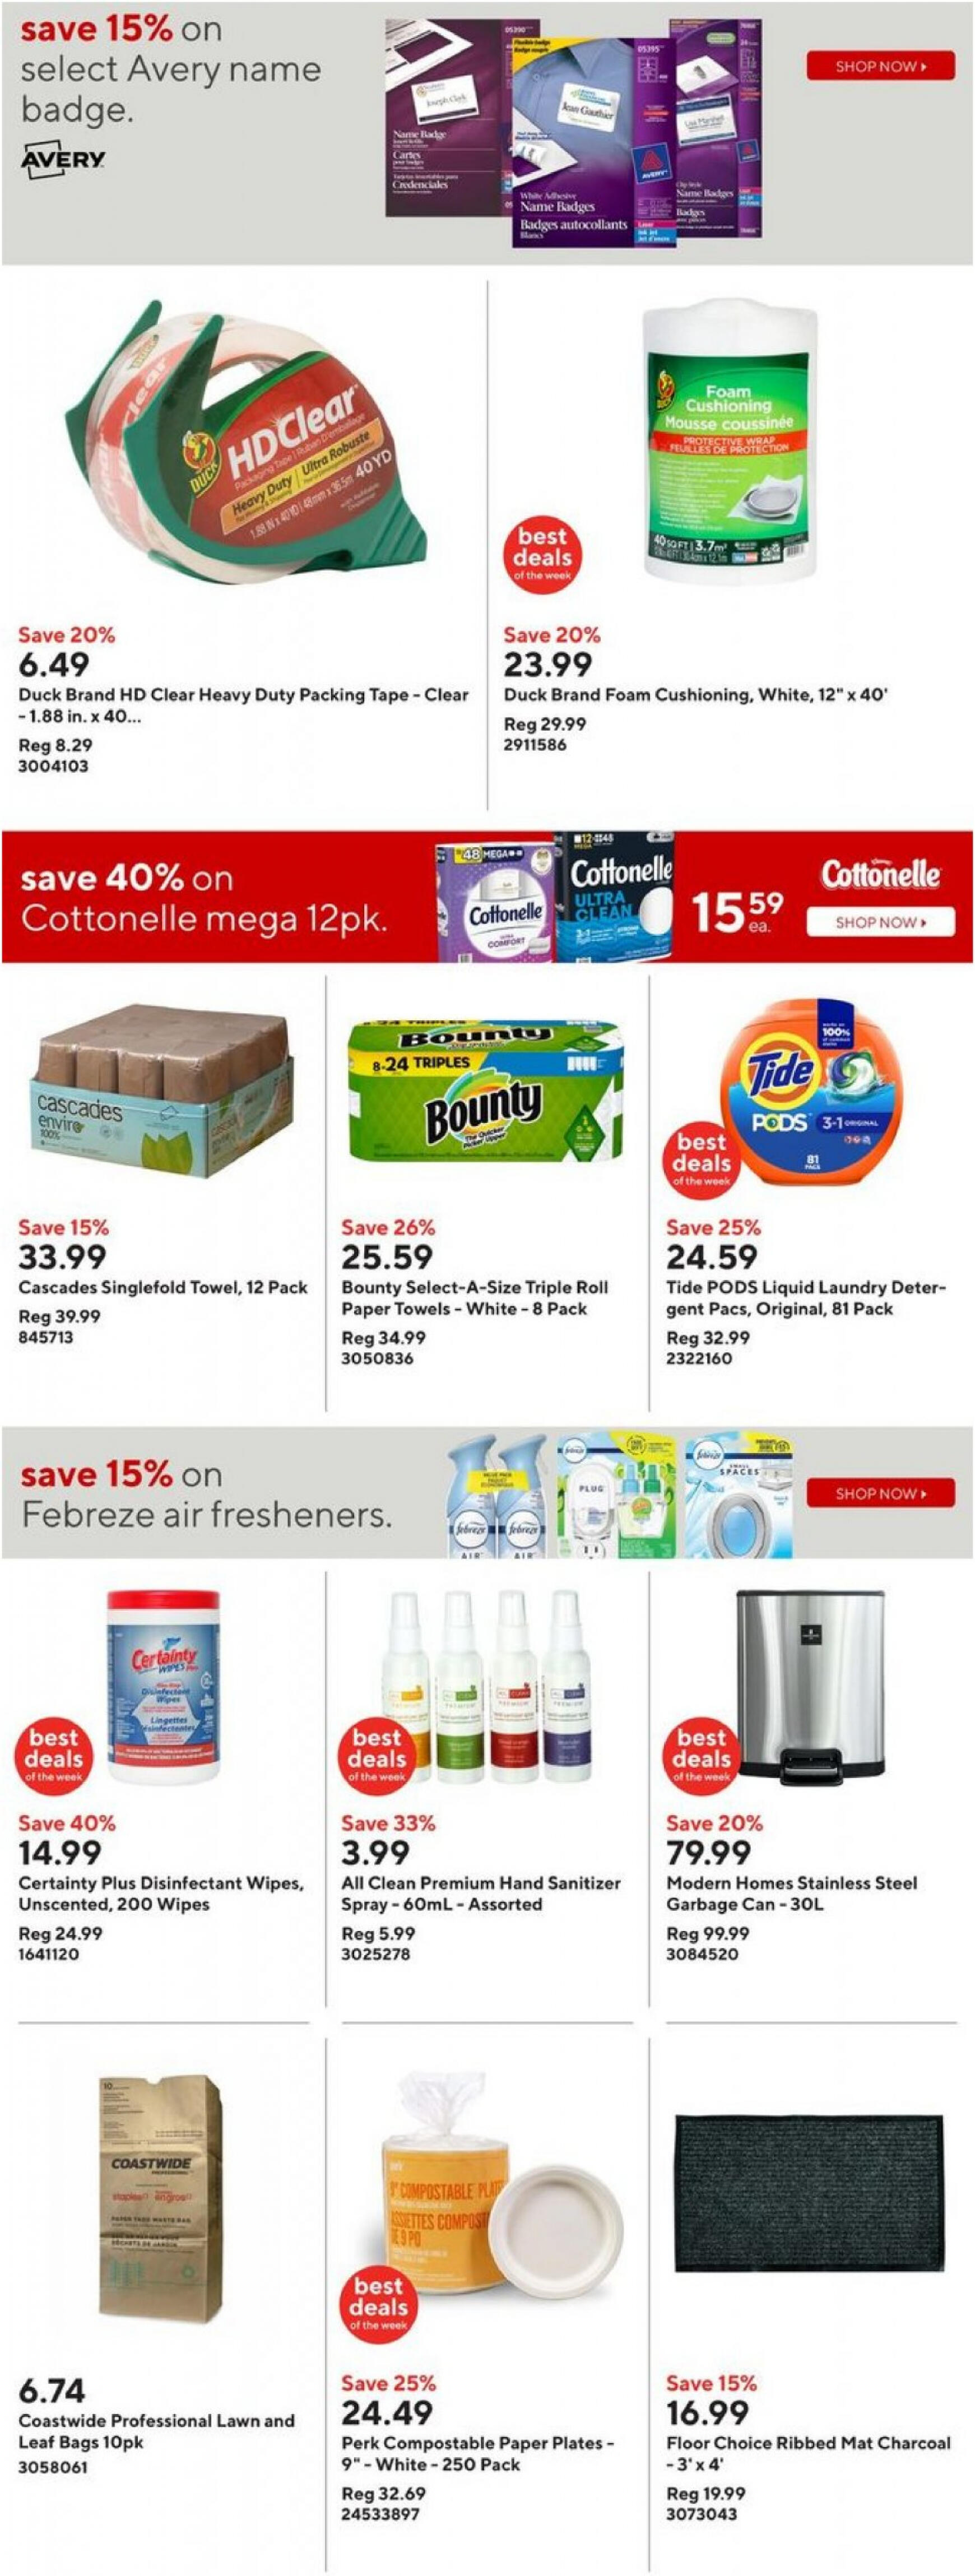 staples - Staples - Weekly flyer current 10.04. - 17.04. - page: 20